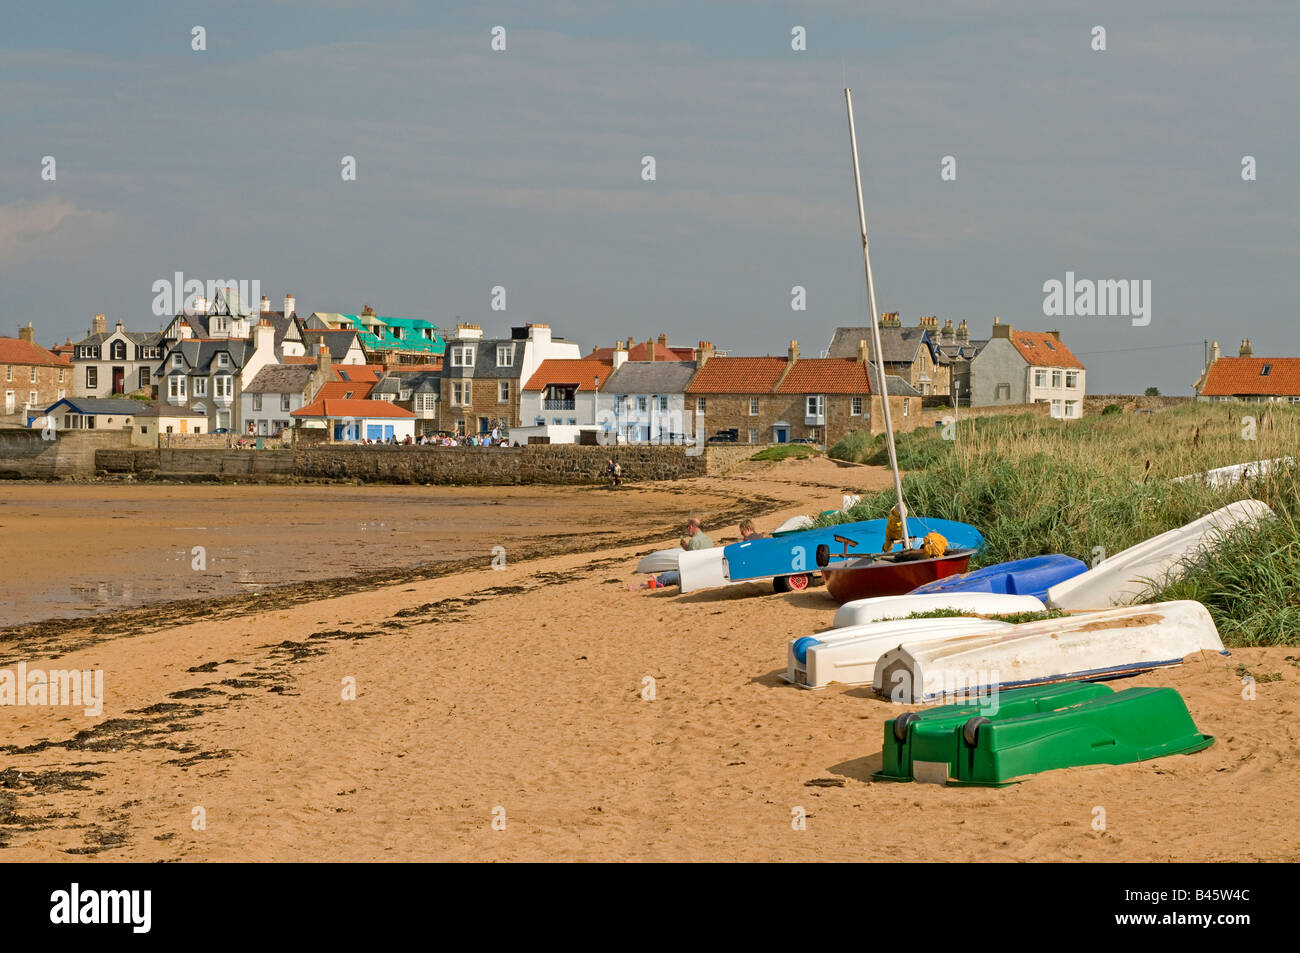 Leisure Craft resting at low tide on the sands at Elie Harbour Kingdom of Fife's East Neuk Stock Photo